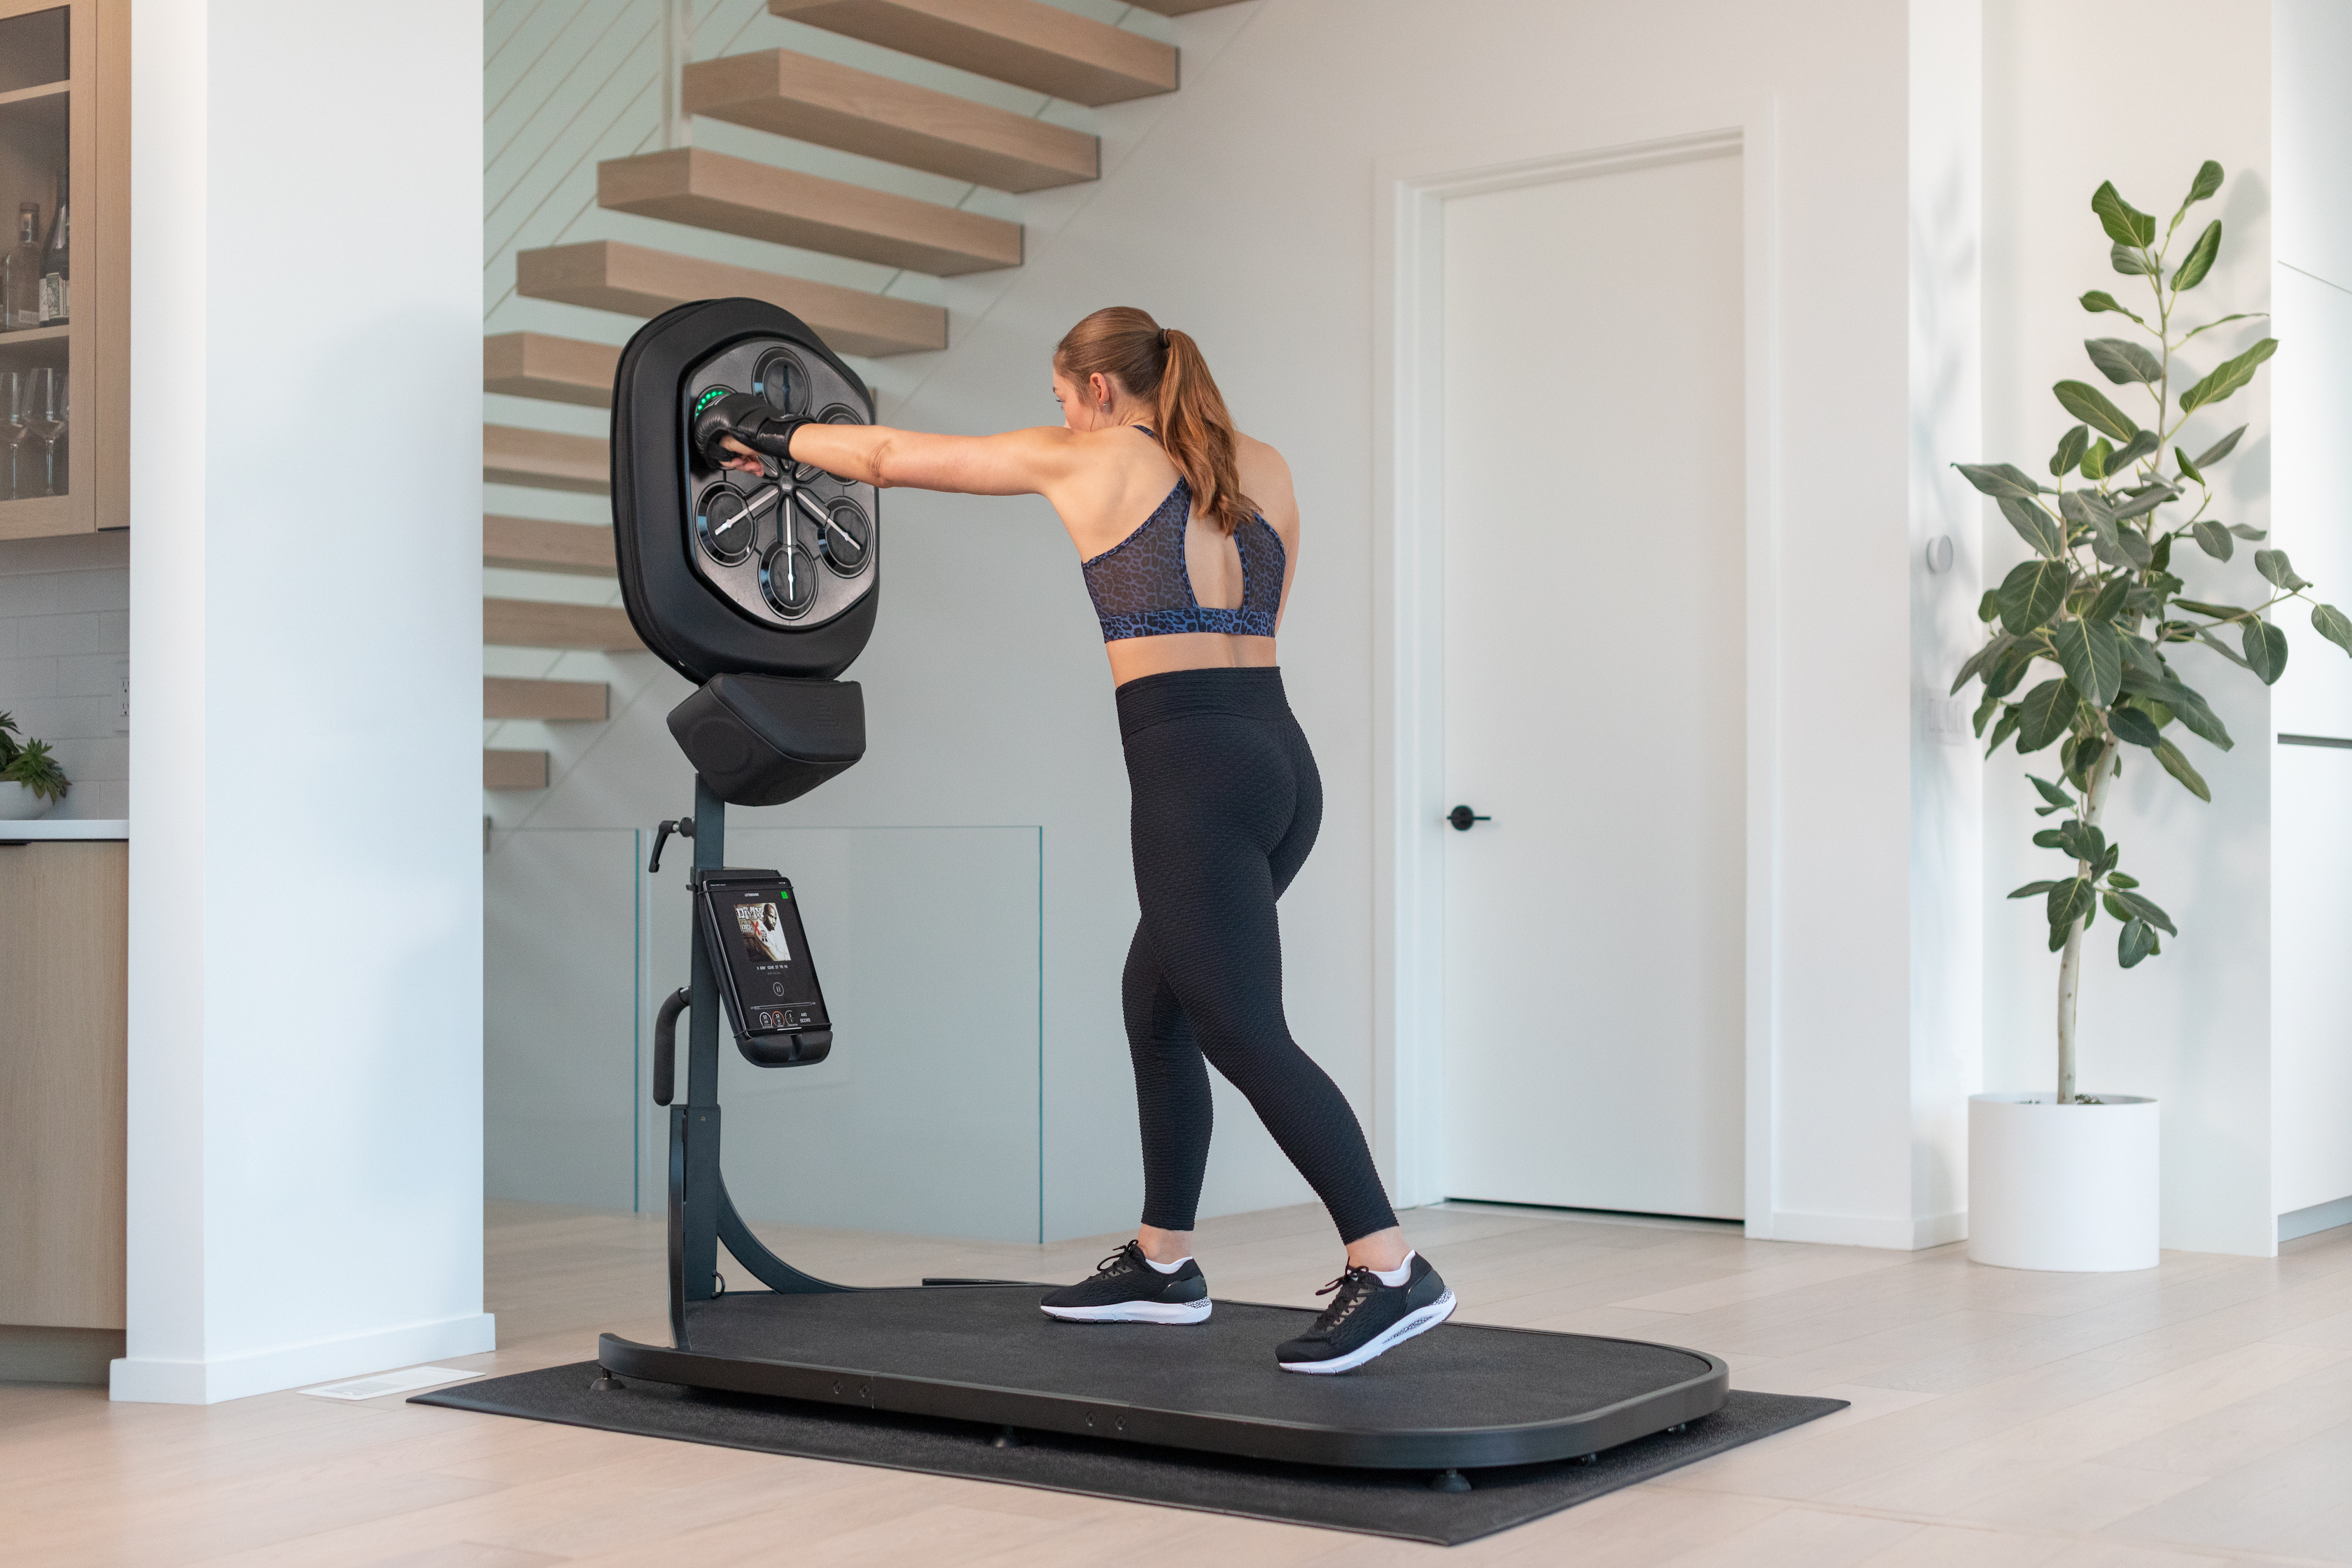 Liteboxer Is an At-Home Boxing Workout That Packs a Punch